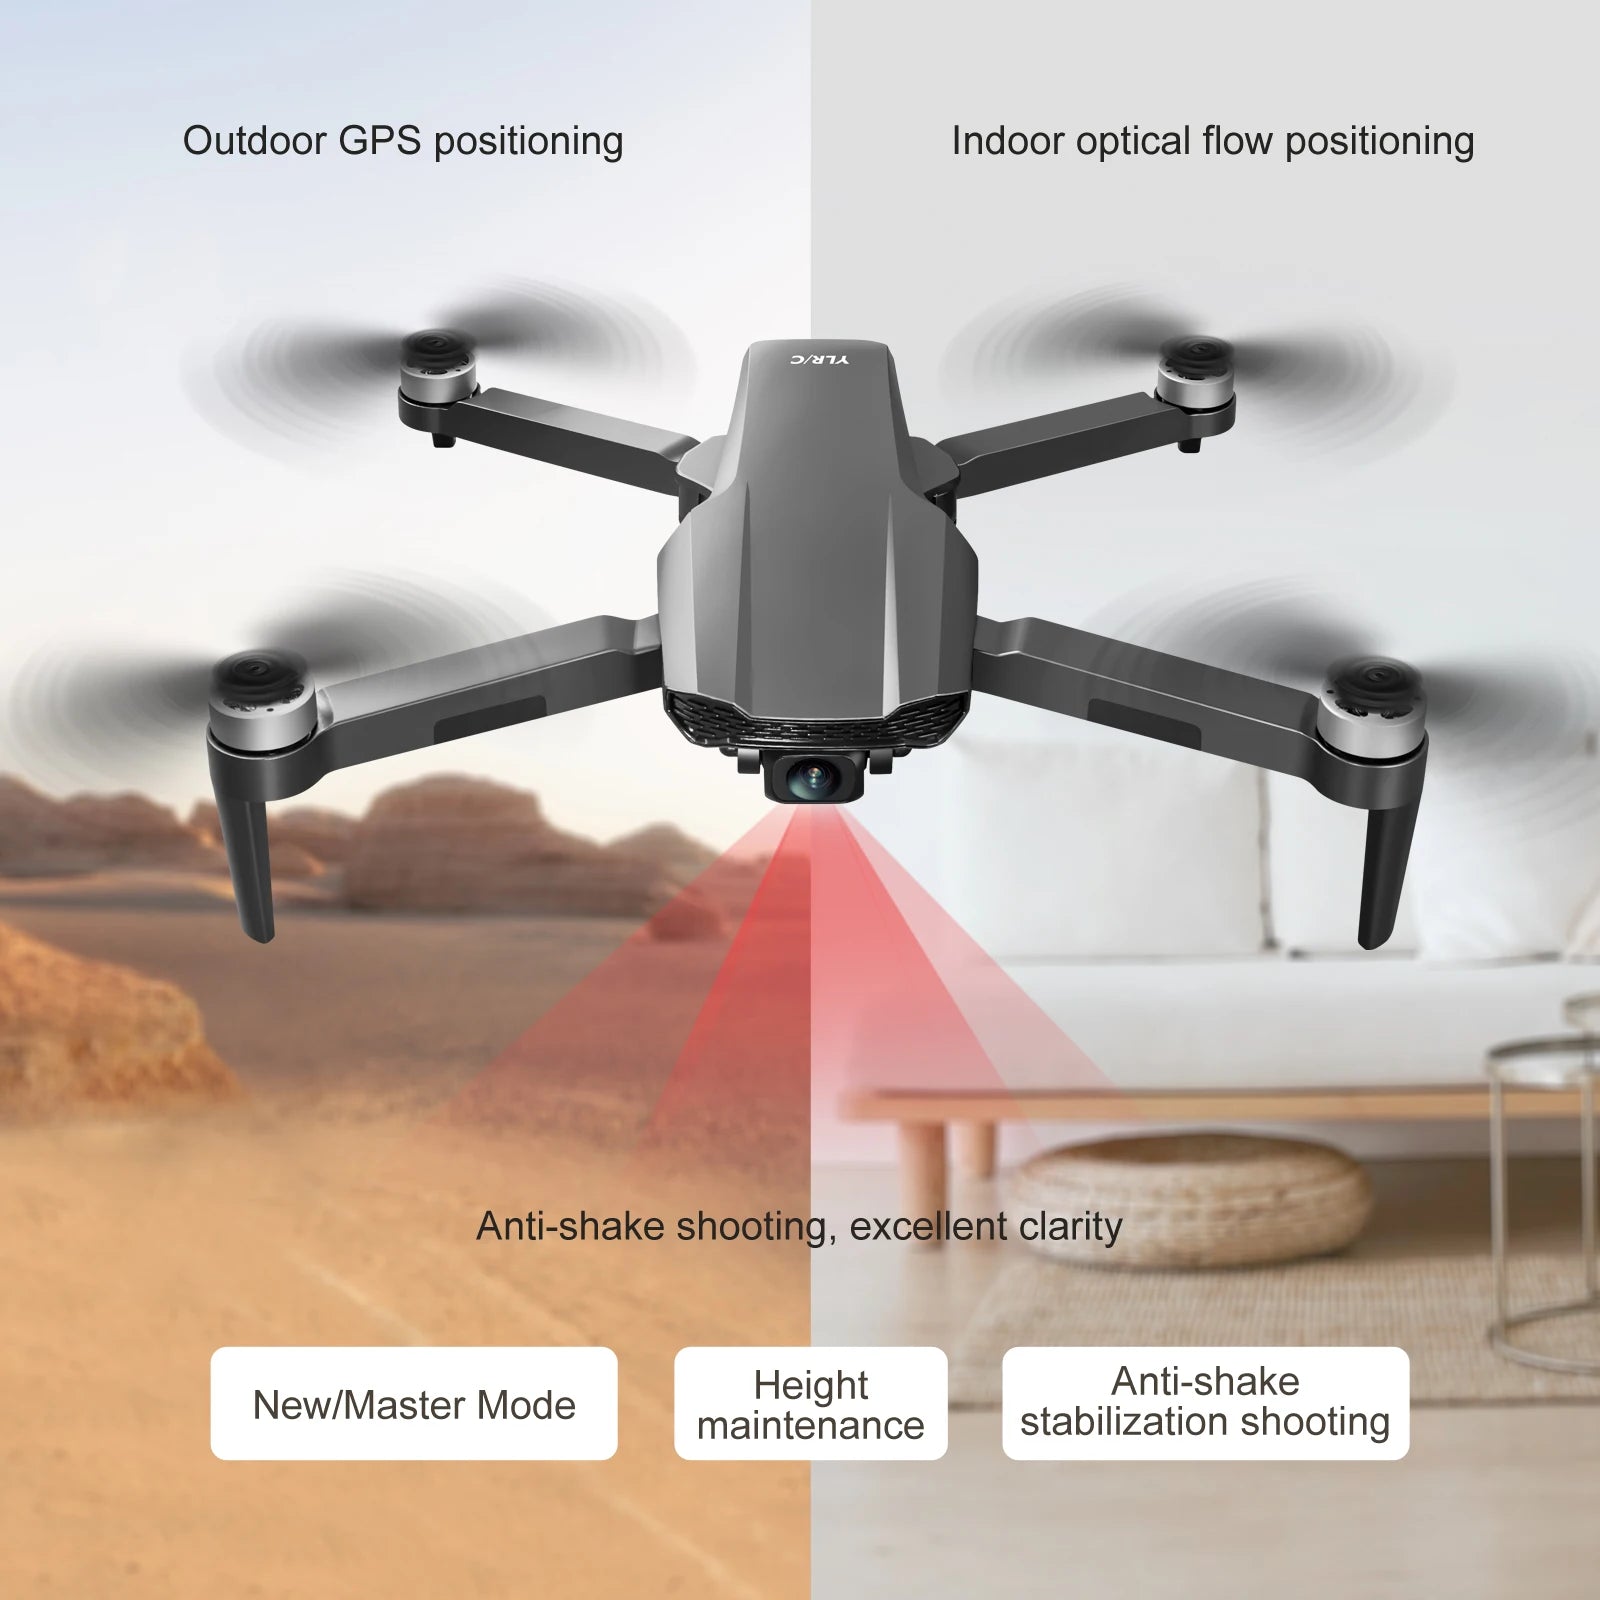 QJ S106 GPS Drone, outdoor gps positioning indoor optical flow positioning . excellent clarity